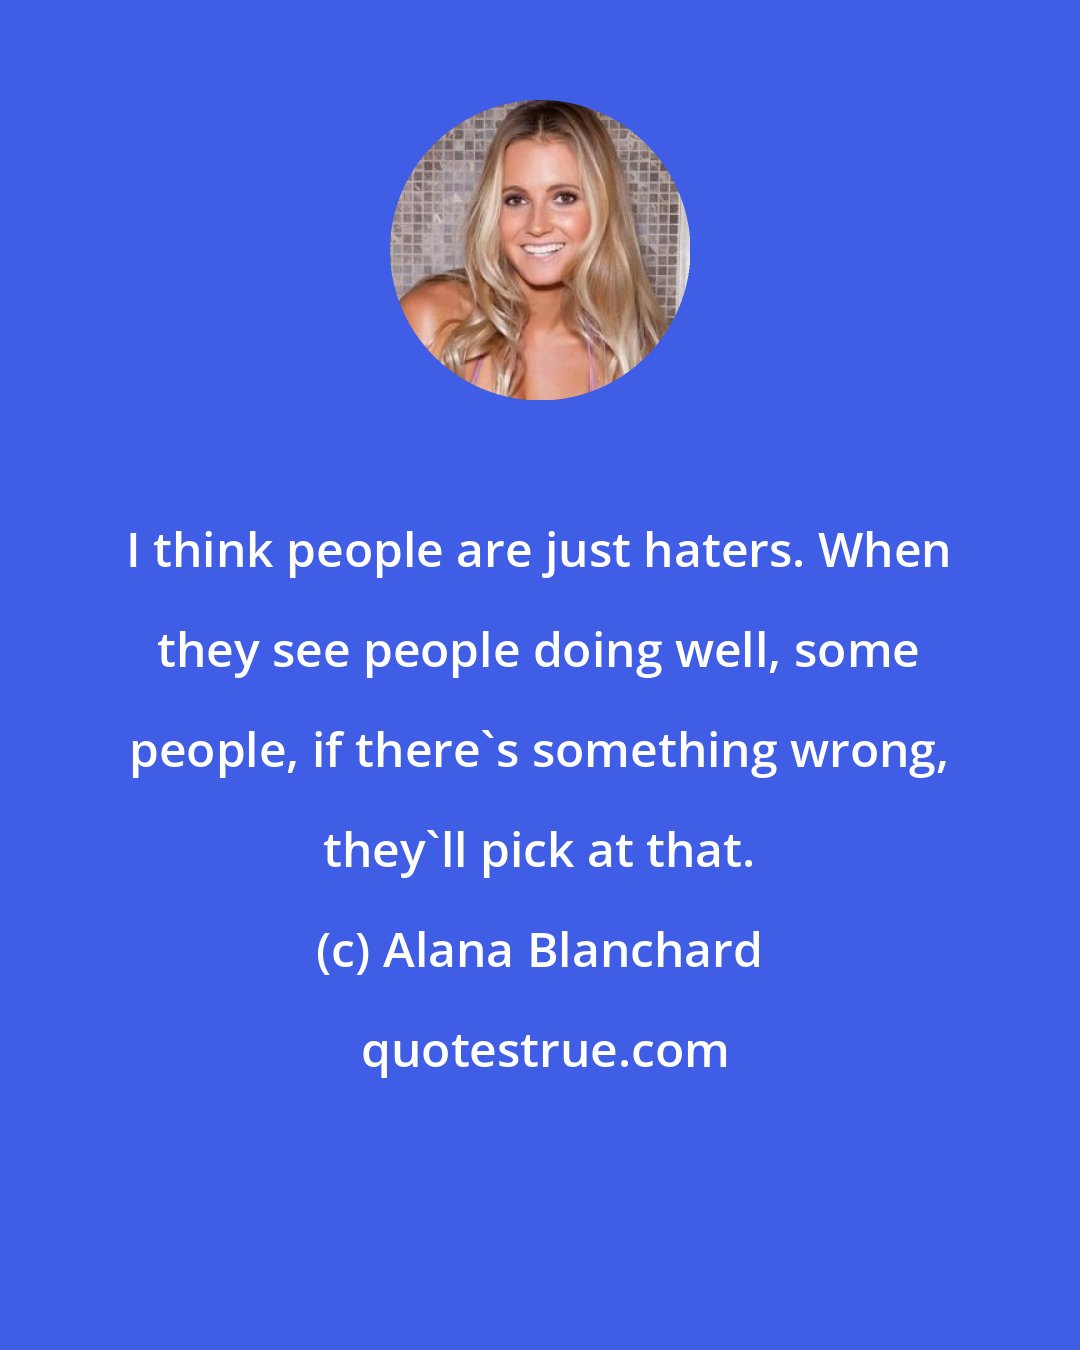 Alana Blanchard: I think people are just haters. When they see people doing well, some people, if there's something wrong, they'll pick at that.